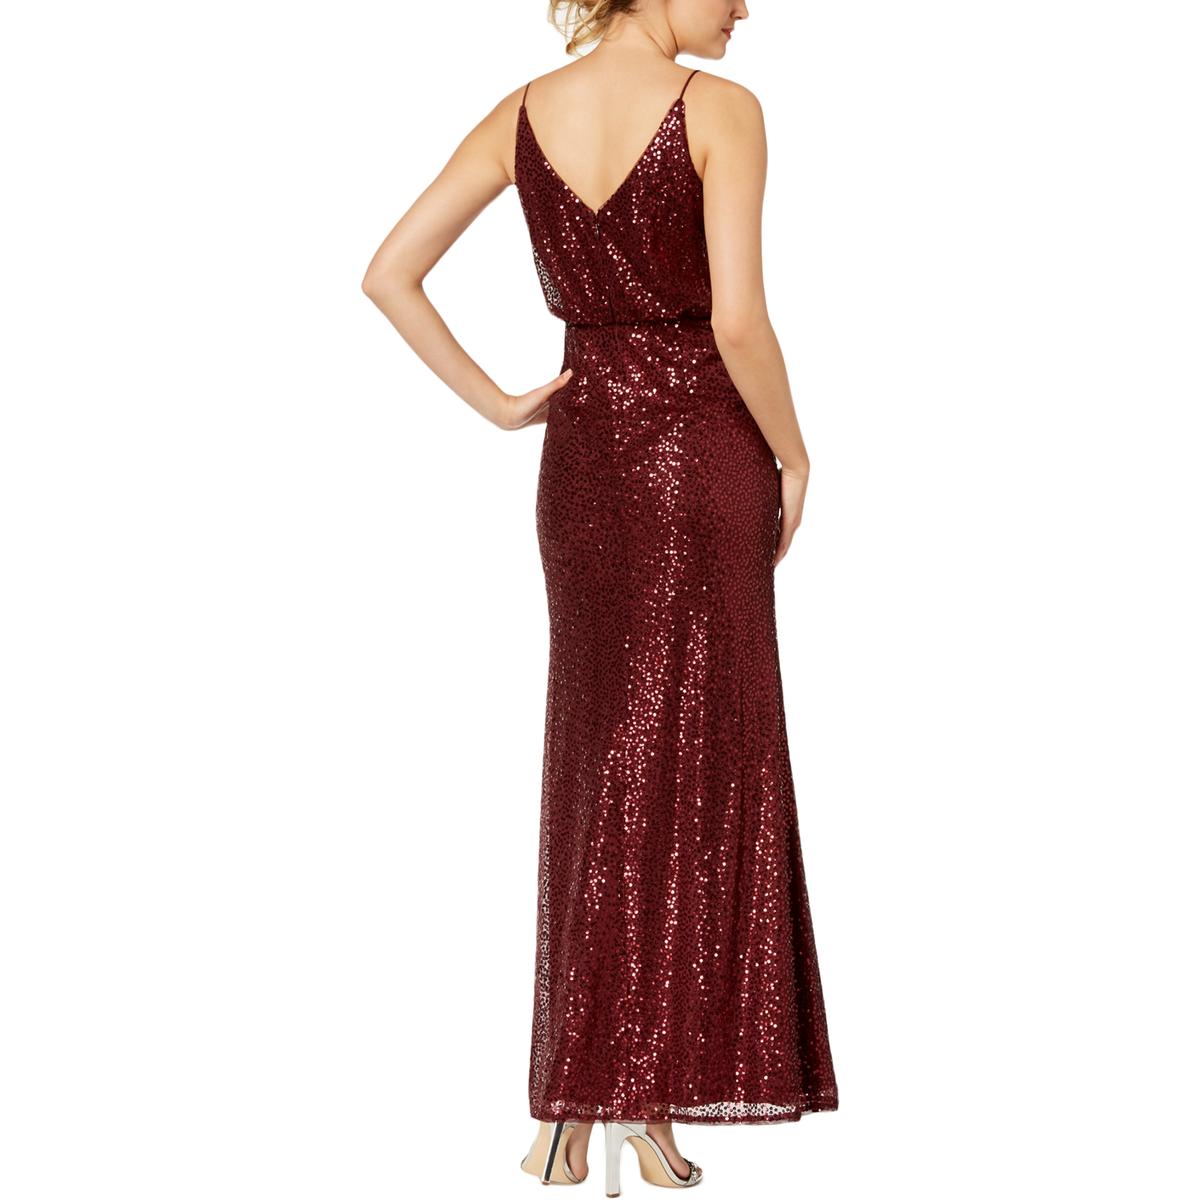 Adrianna Papell Womens Red Formal Sequined Evening Dress Gown 12 BHFO ...